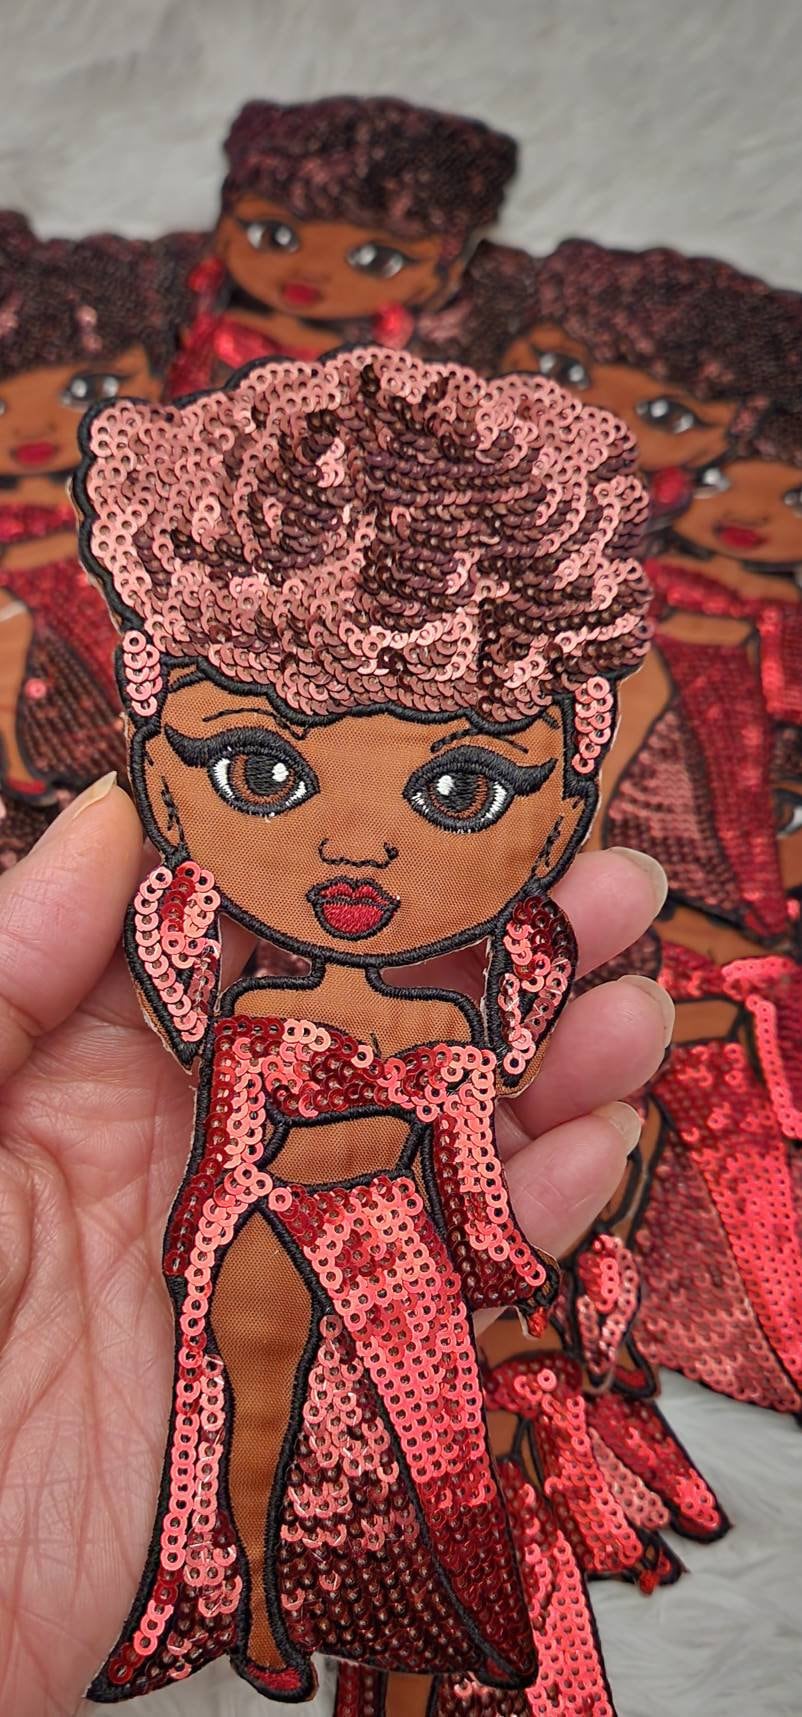 New, "Foxy Red Carlotta" Sequins & Satin, 6" Patch, Iron-on Applique for DIY Projects, Black Girl Patch,Camo and Denim Jacket Patch